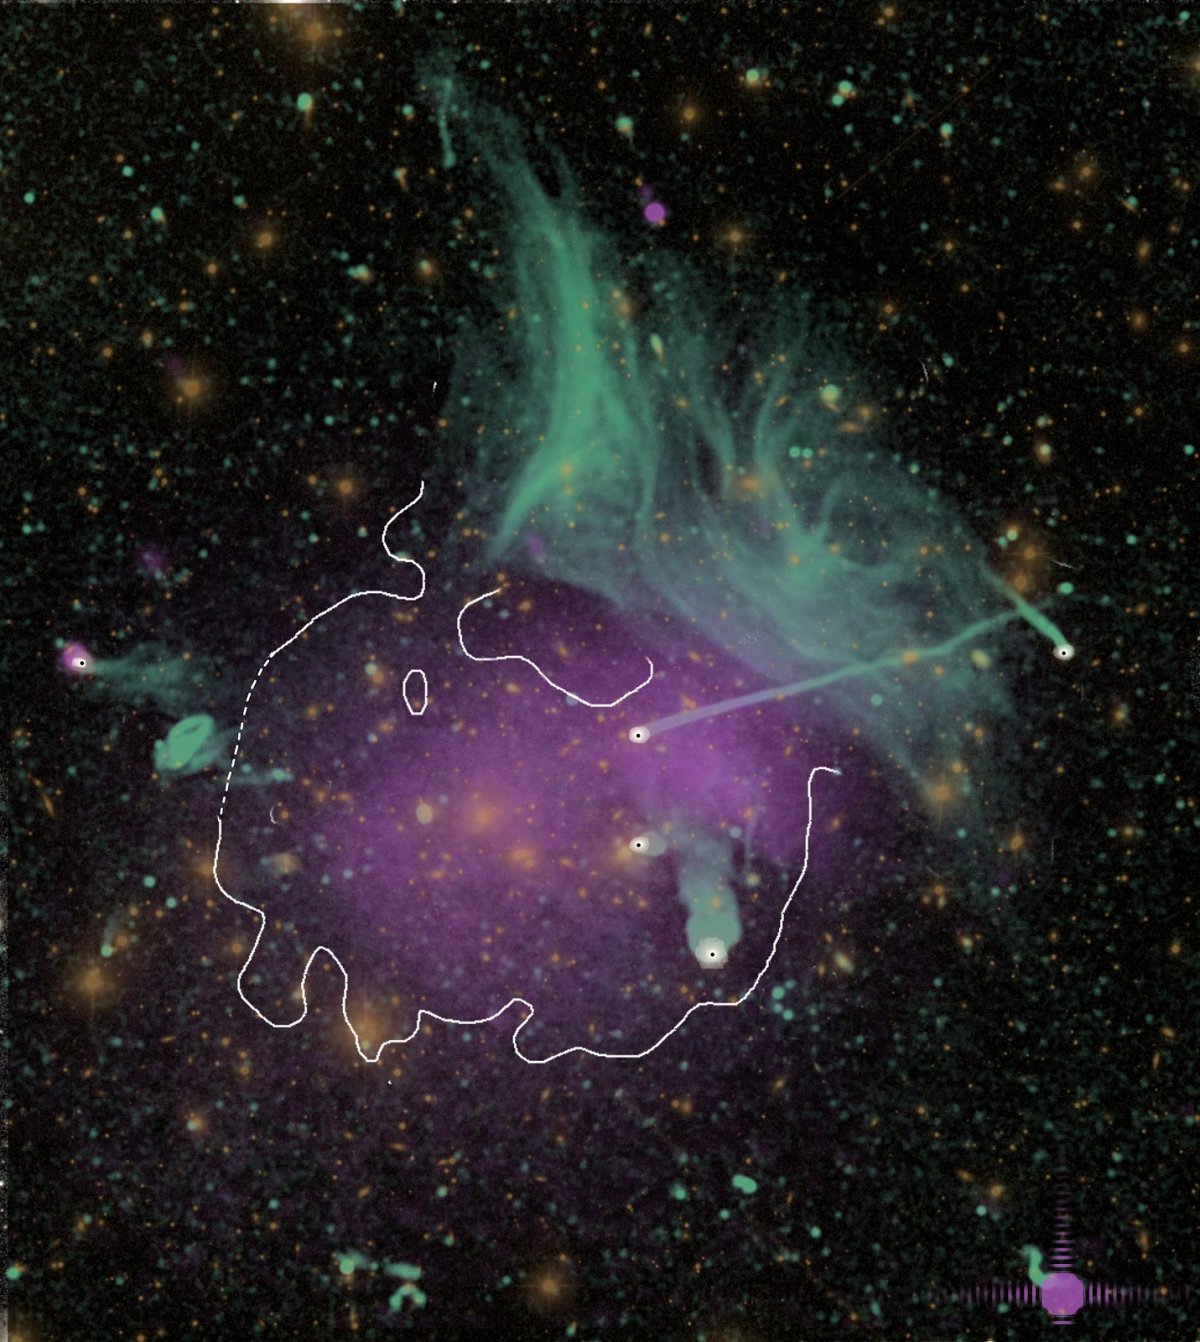 Traced outline of galaxy clusters